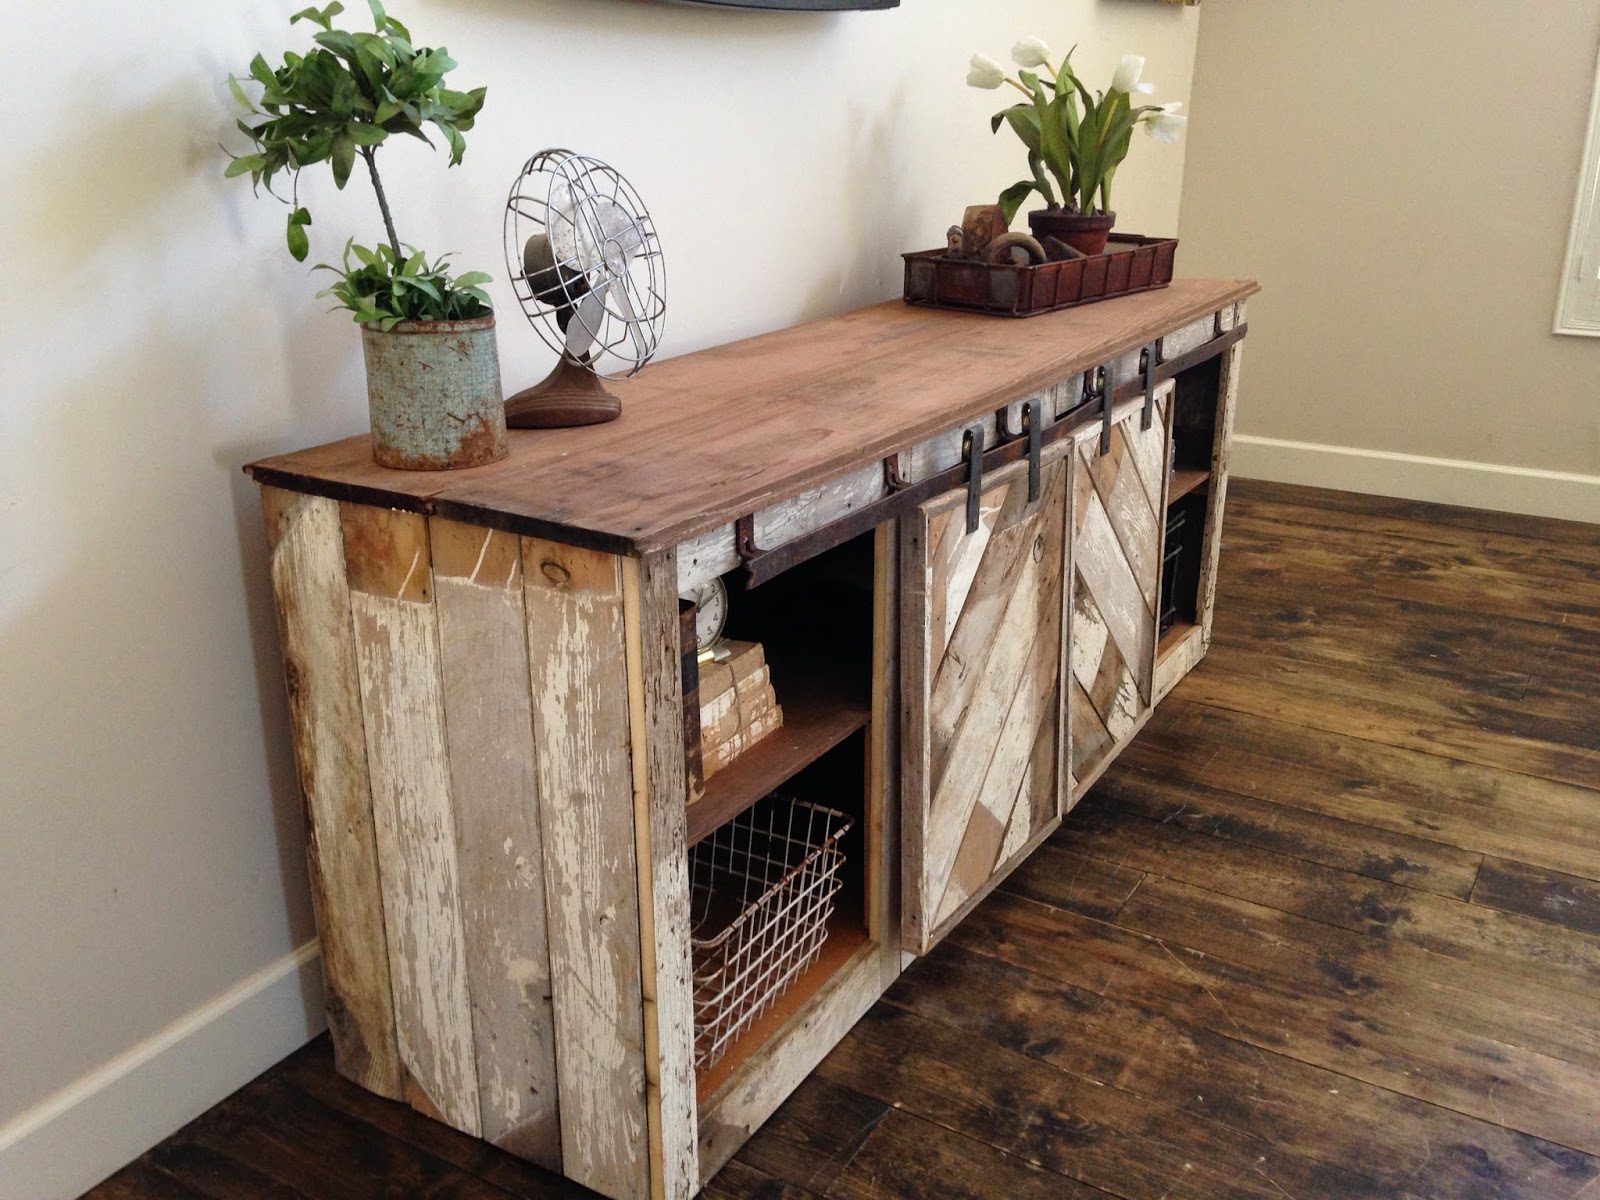 Ana White | Grandy Sliding Door Console - DIY Projects - rustic distressed barn door sliding console furniture